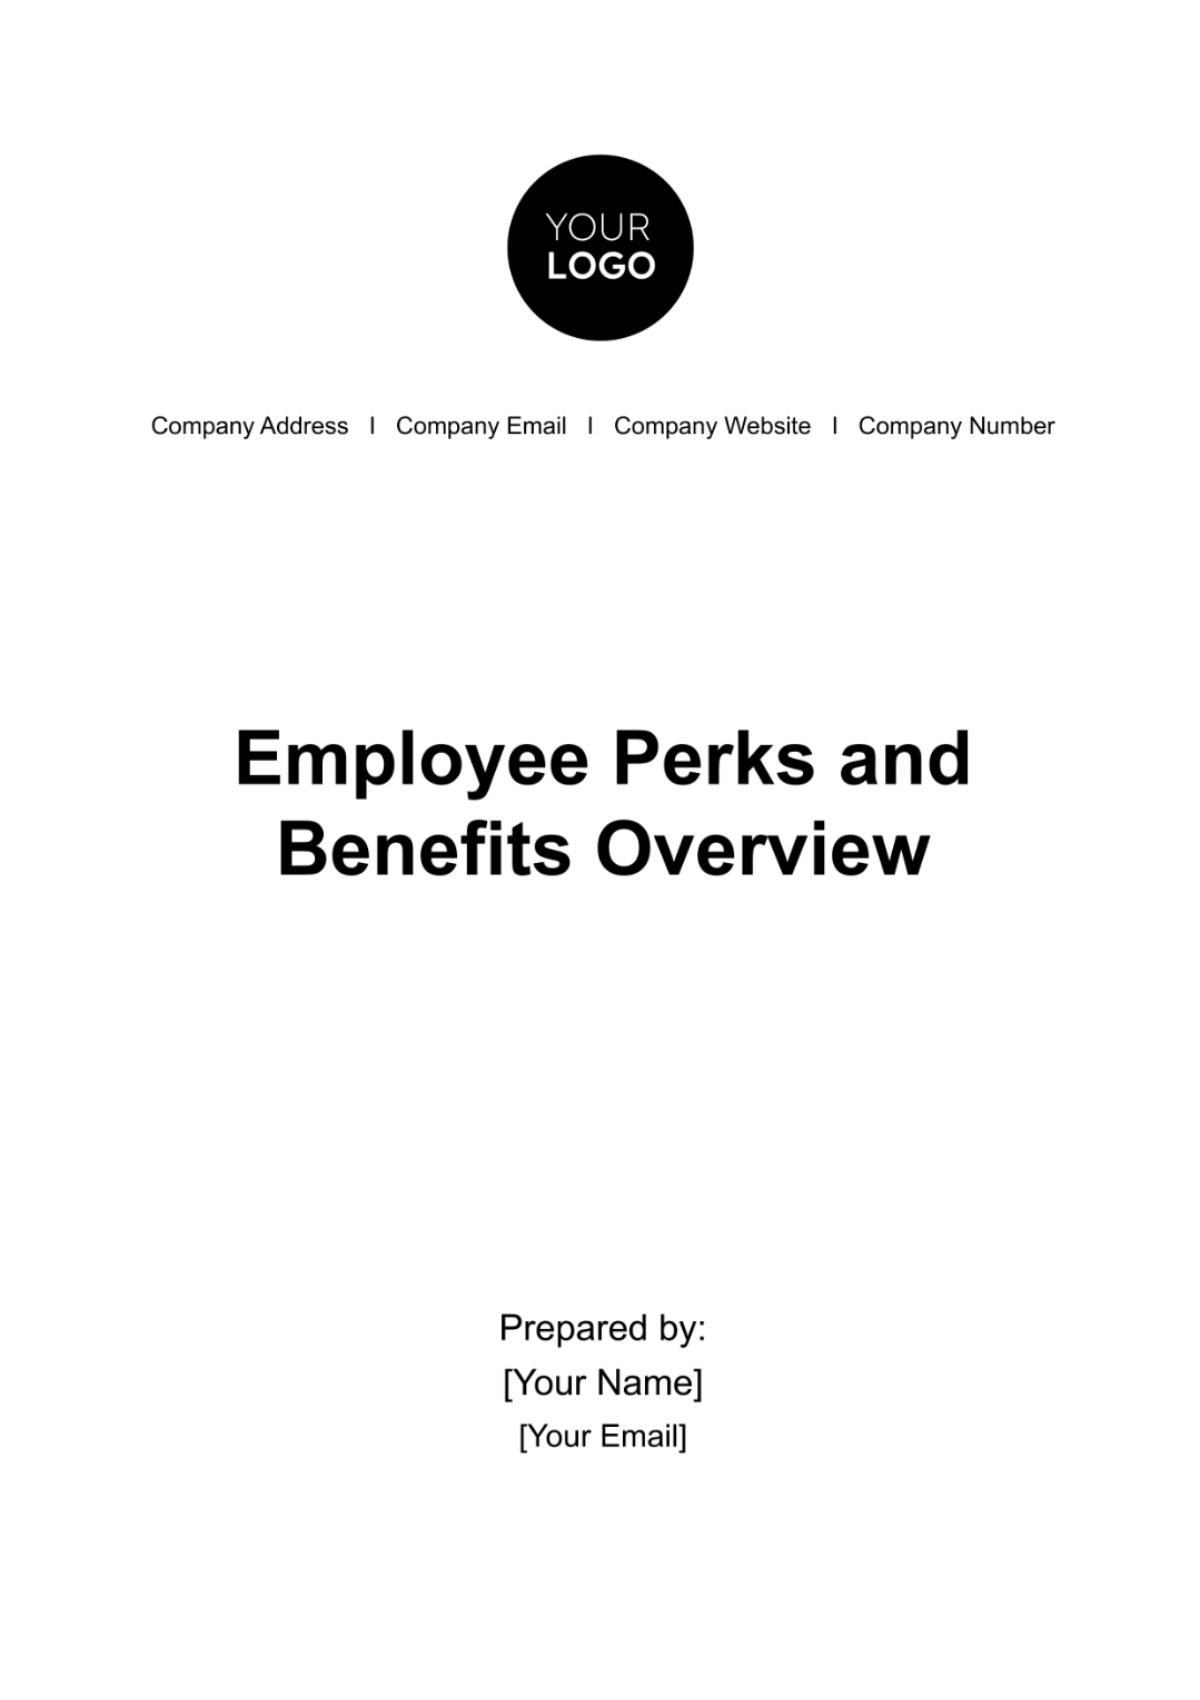 Free Employee Benefits & Perks Overview HR Template